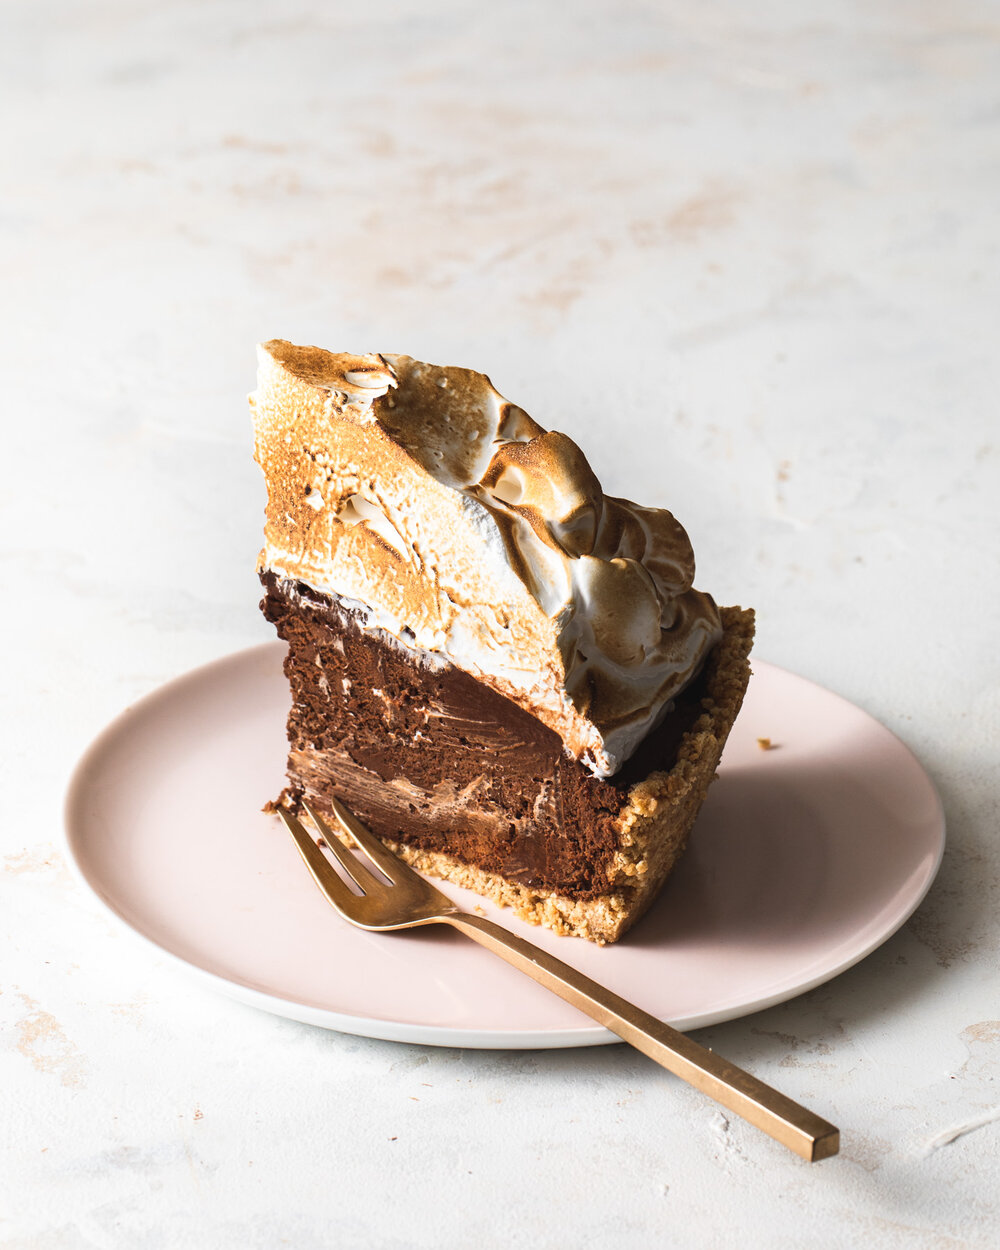 A slice of peanut butter s’mores pie with chocolate peanut butter mousse filling and toasted meringue on top.